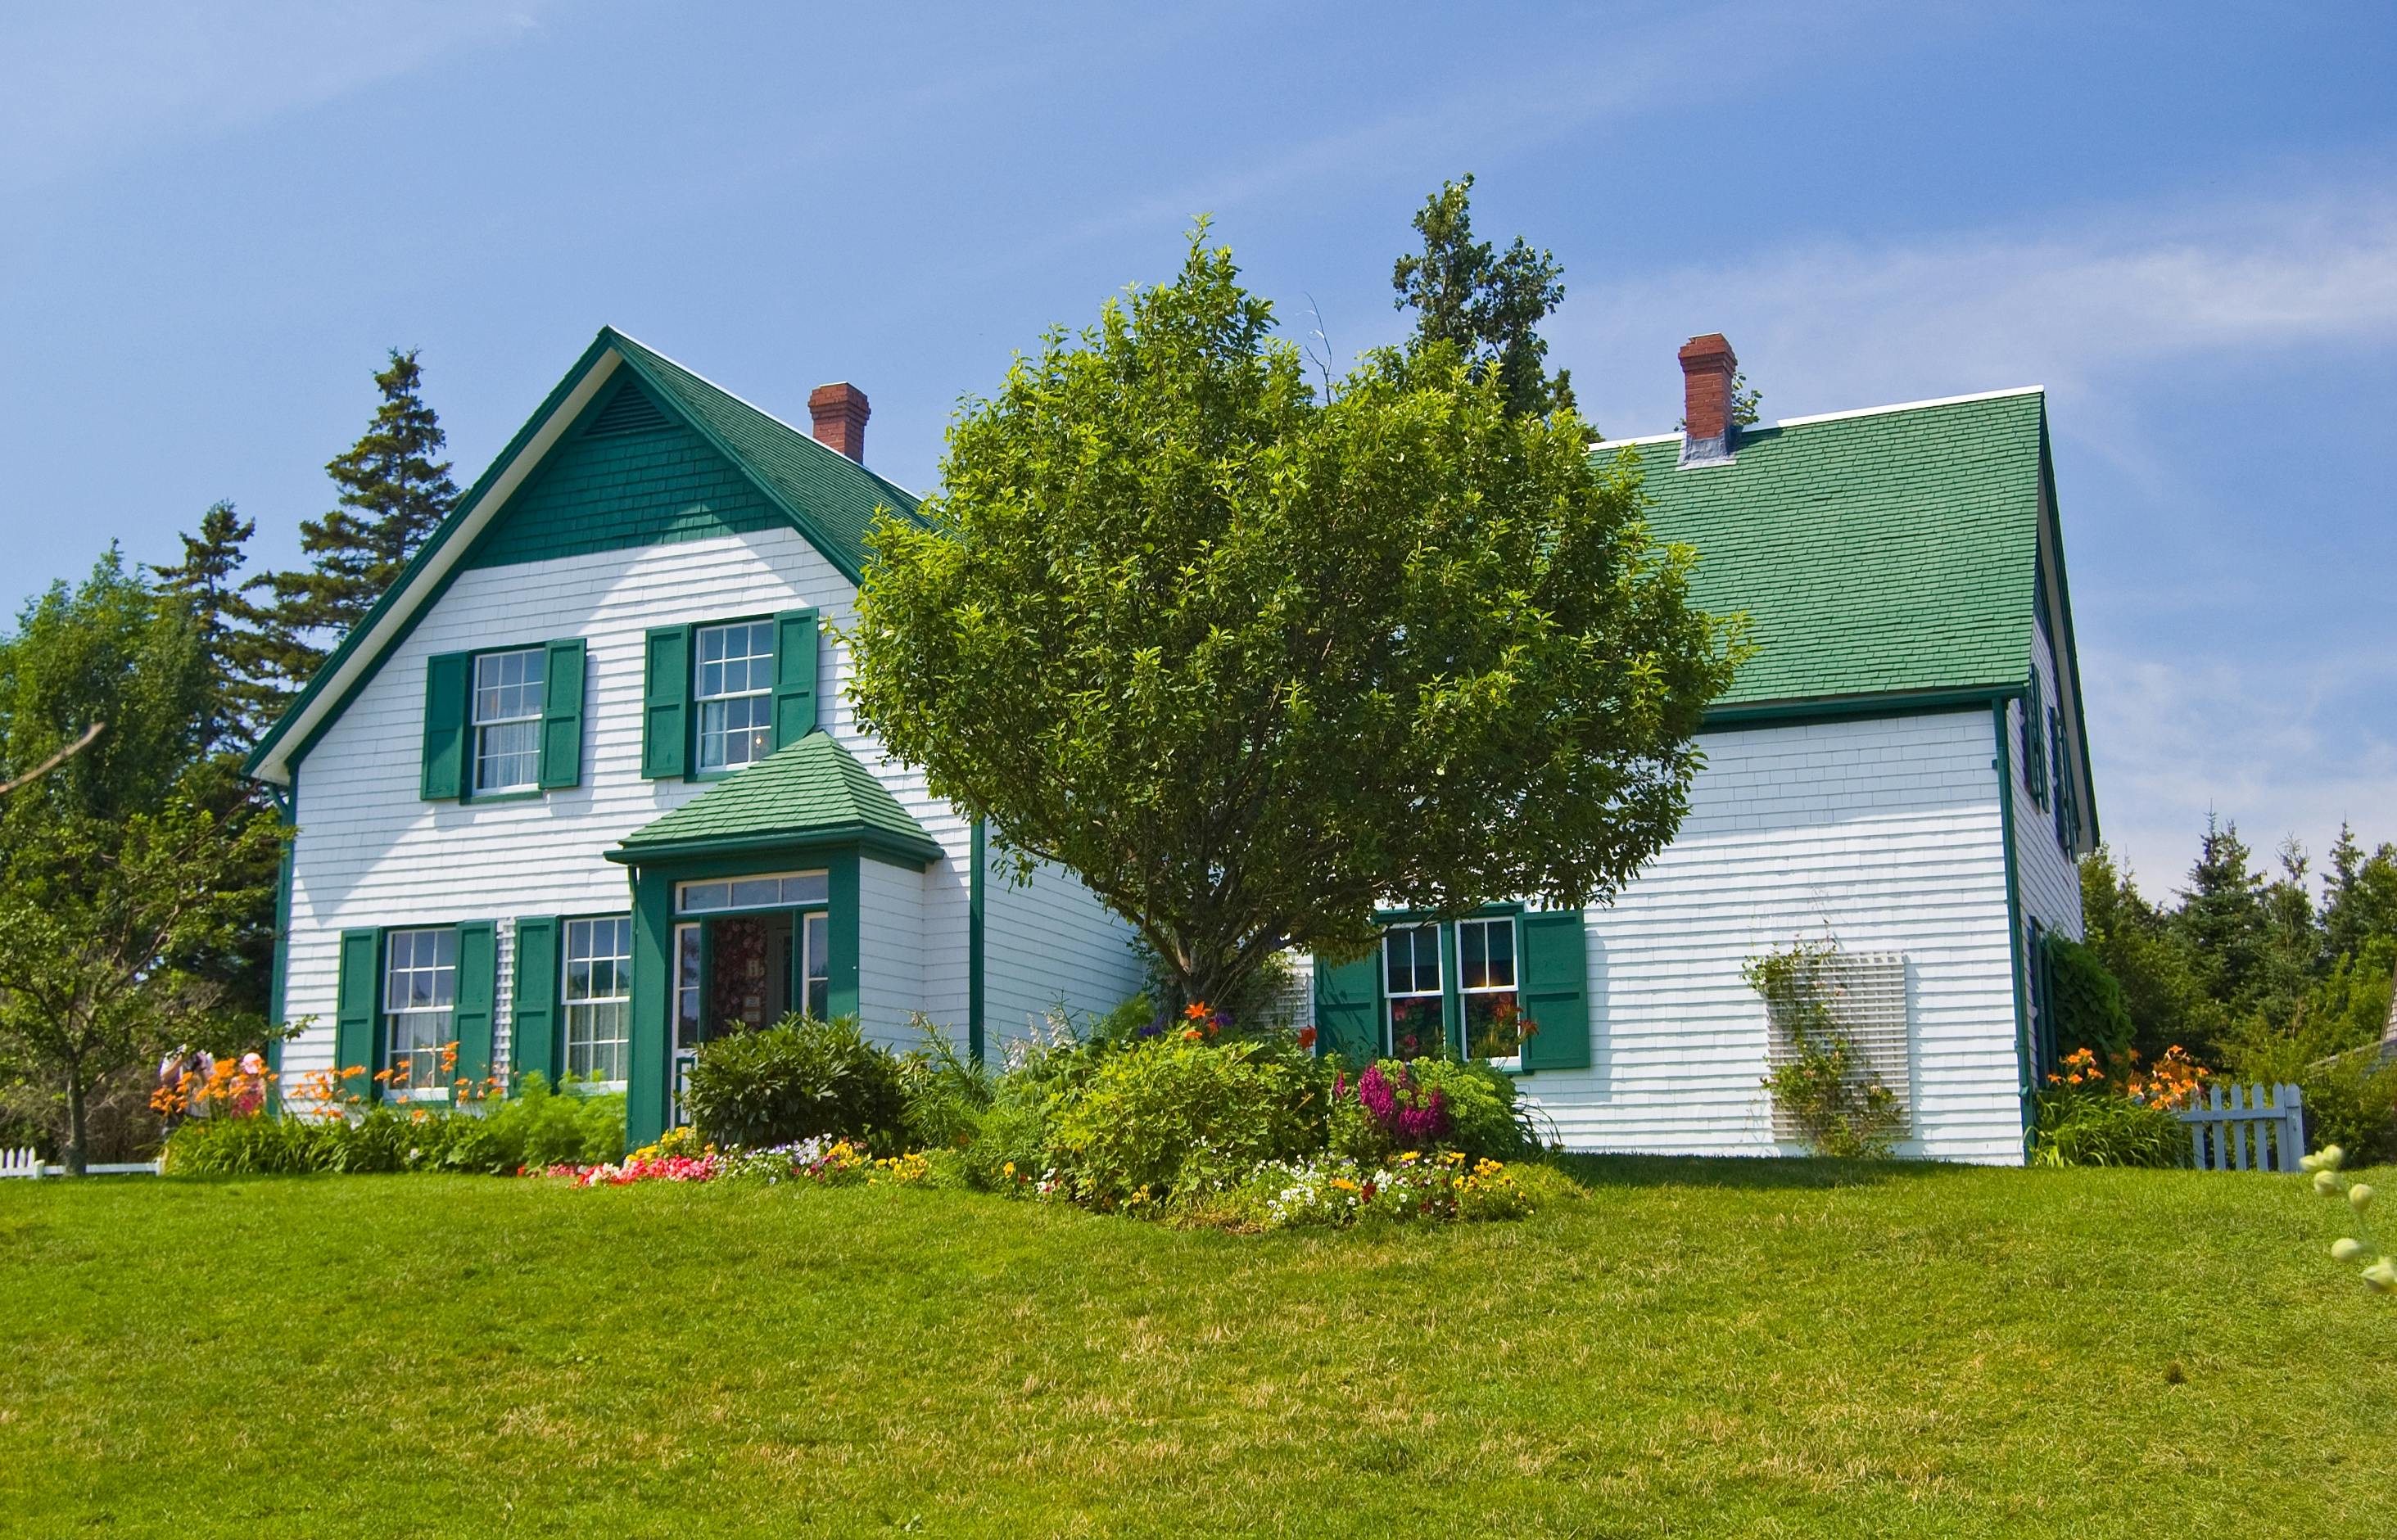 Best of Prince Edward Island: private safe tour